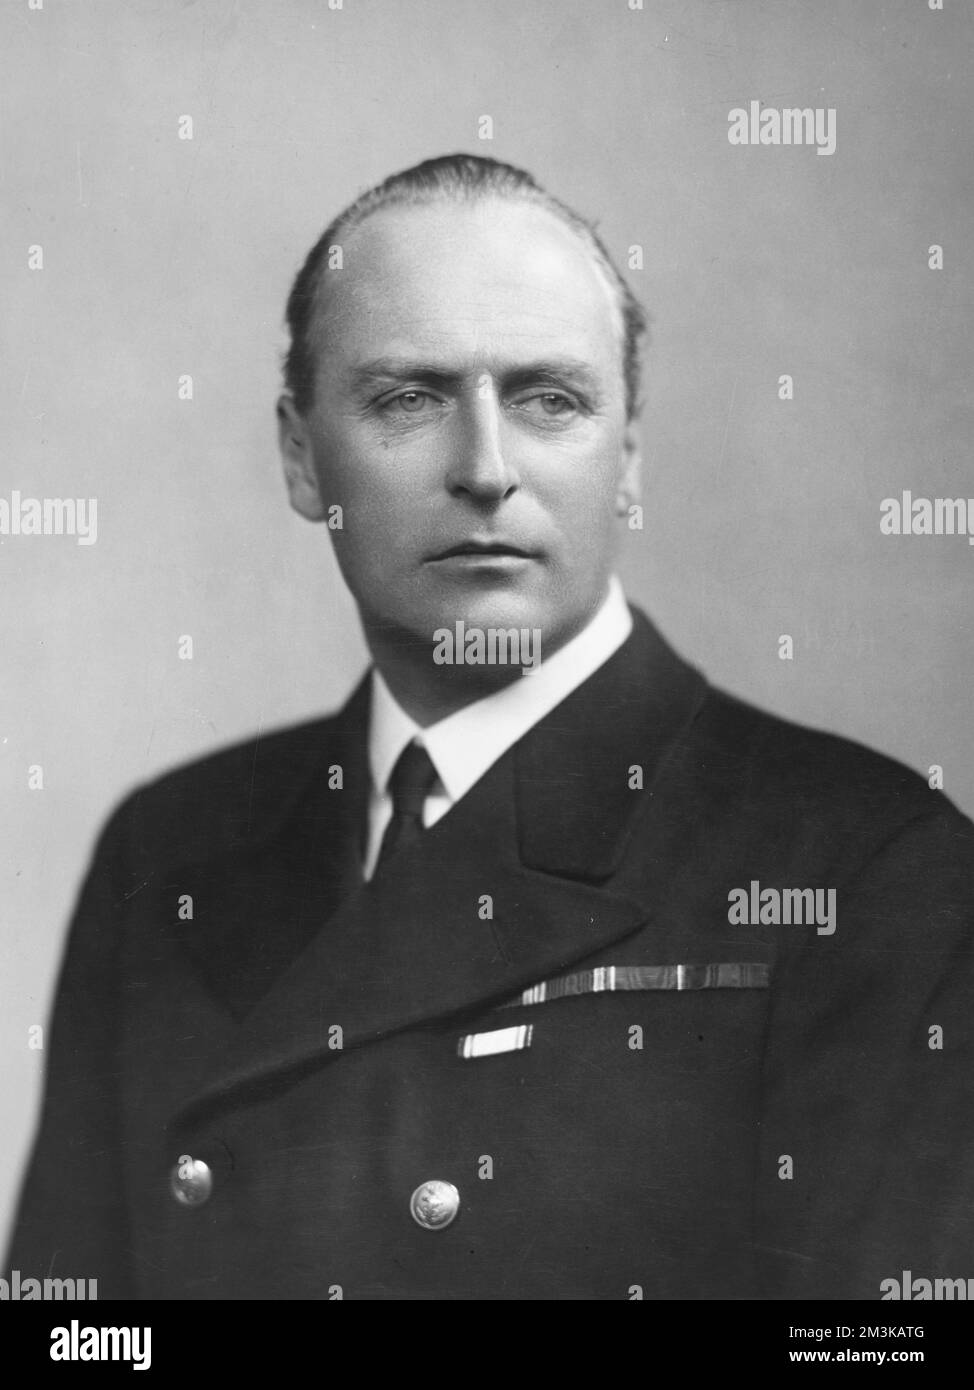 King Olav V of Norway (1903 - 1991), born Prince Alexander Edward Christian Frederik to Prince Carl of Denmark and Princess Maud of Great Britain at Sandringham in Norfolk.  He became known as Prince Olav when his father became King Haakon VII of Norway in 1905.  A well-loved monarch, he reigned from 1957 to 1991.  He was also a proficient athlete, excelling at ski-jumping and winning an Olympic gold in sailing at the 1928 Olympics.  He was the last surviving grandchild of King Edward VII and Queen Alexandra when he died in 1991.  c.1940 Stock Photo